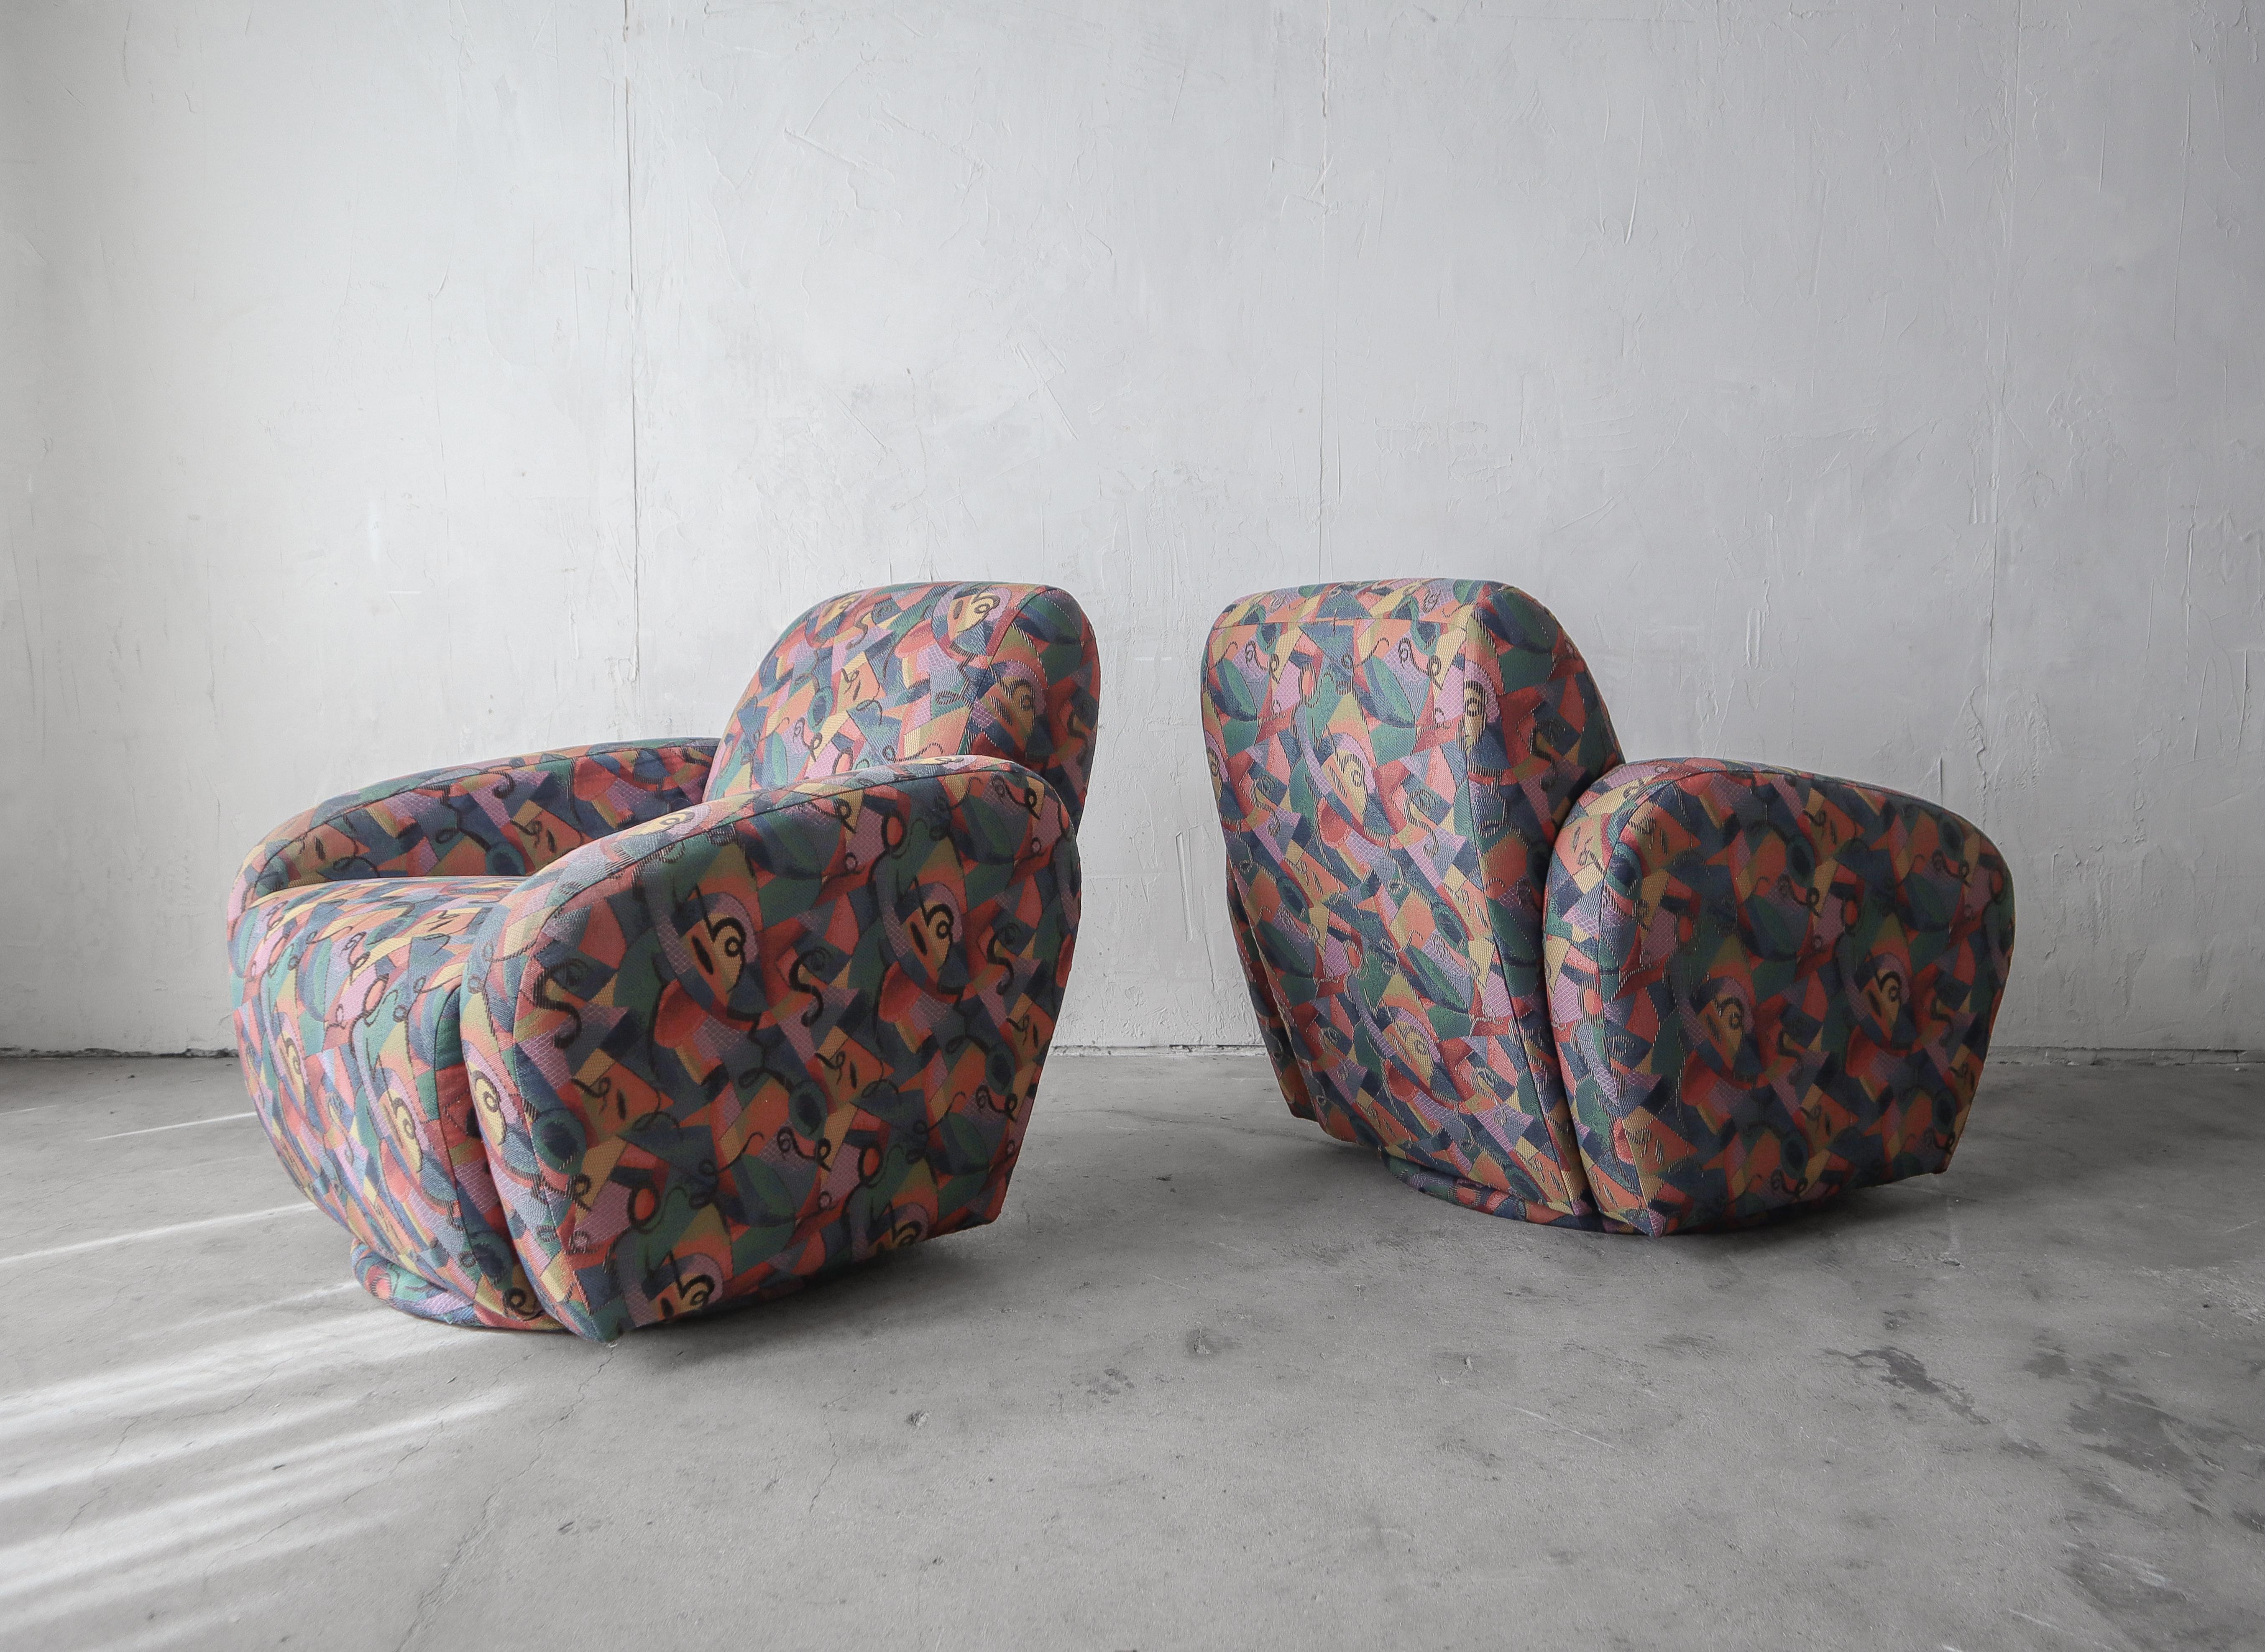 A nice pair of all original Post Modern swivel chairs by Preview Furniture.

The chairs are all original, left as found.  The chairs are structurally sound and the fabric is in good and useable condition, free of any damage, staining or odors.

The